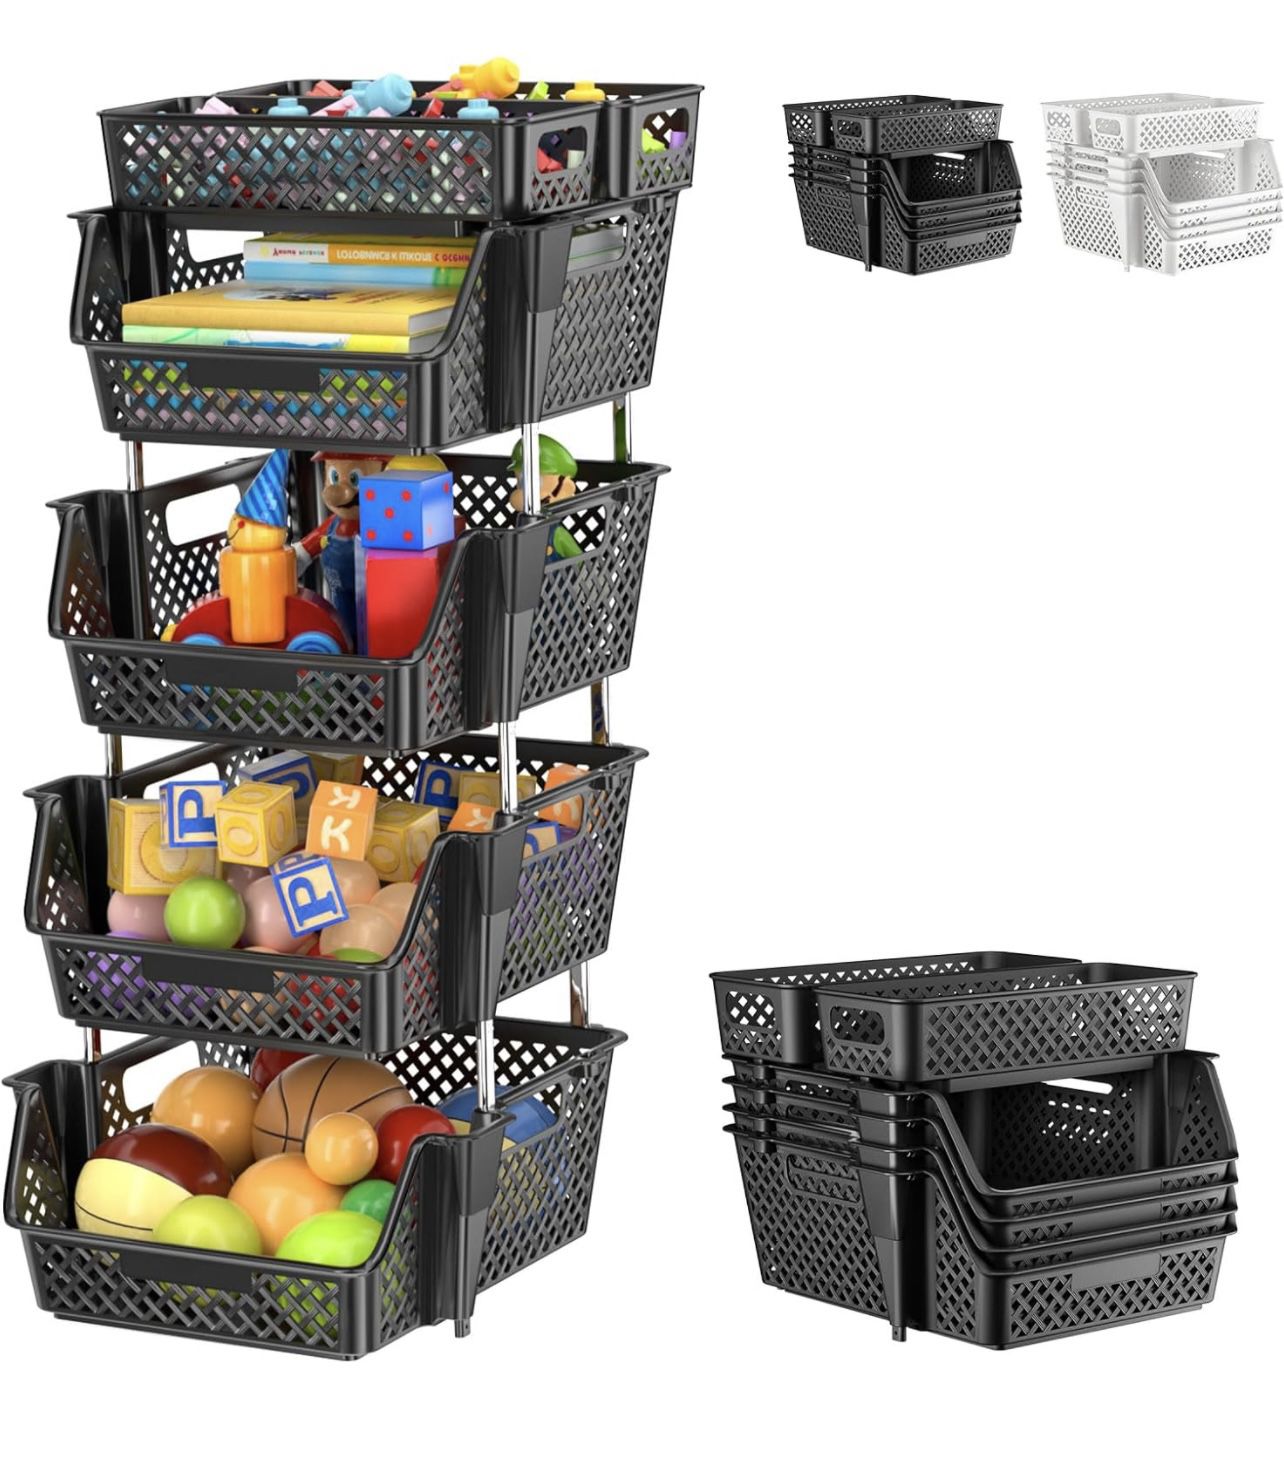 Plastic Stackable Storage Bins 4 Tier, Large Capacity Multi-Functional Storage Containers Shelves for Organizing Food